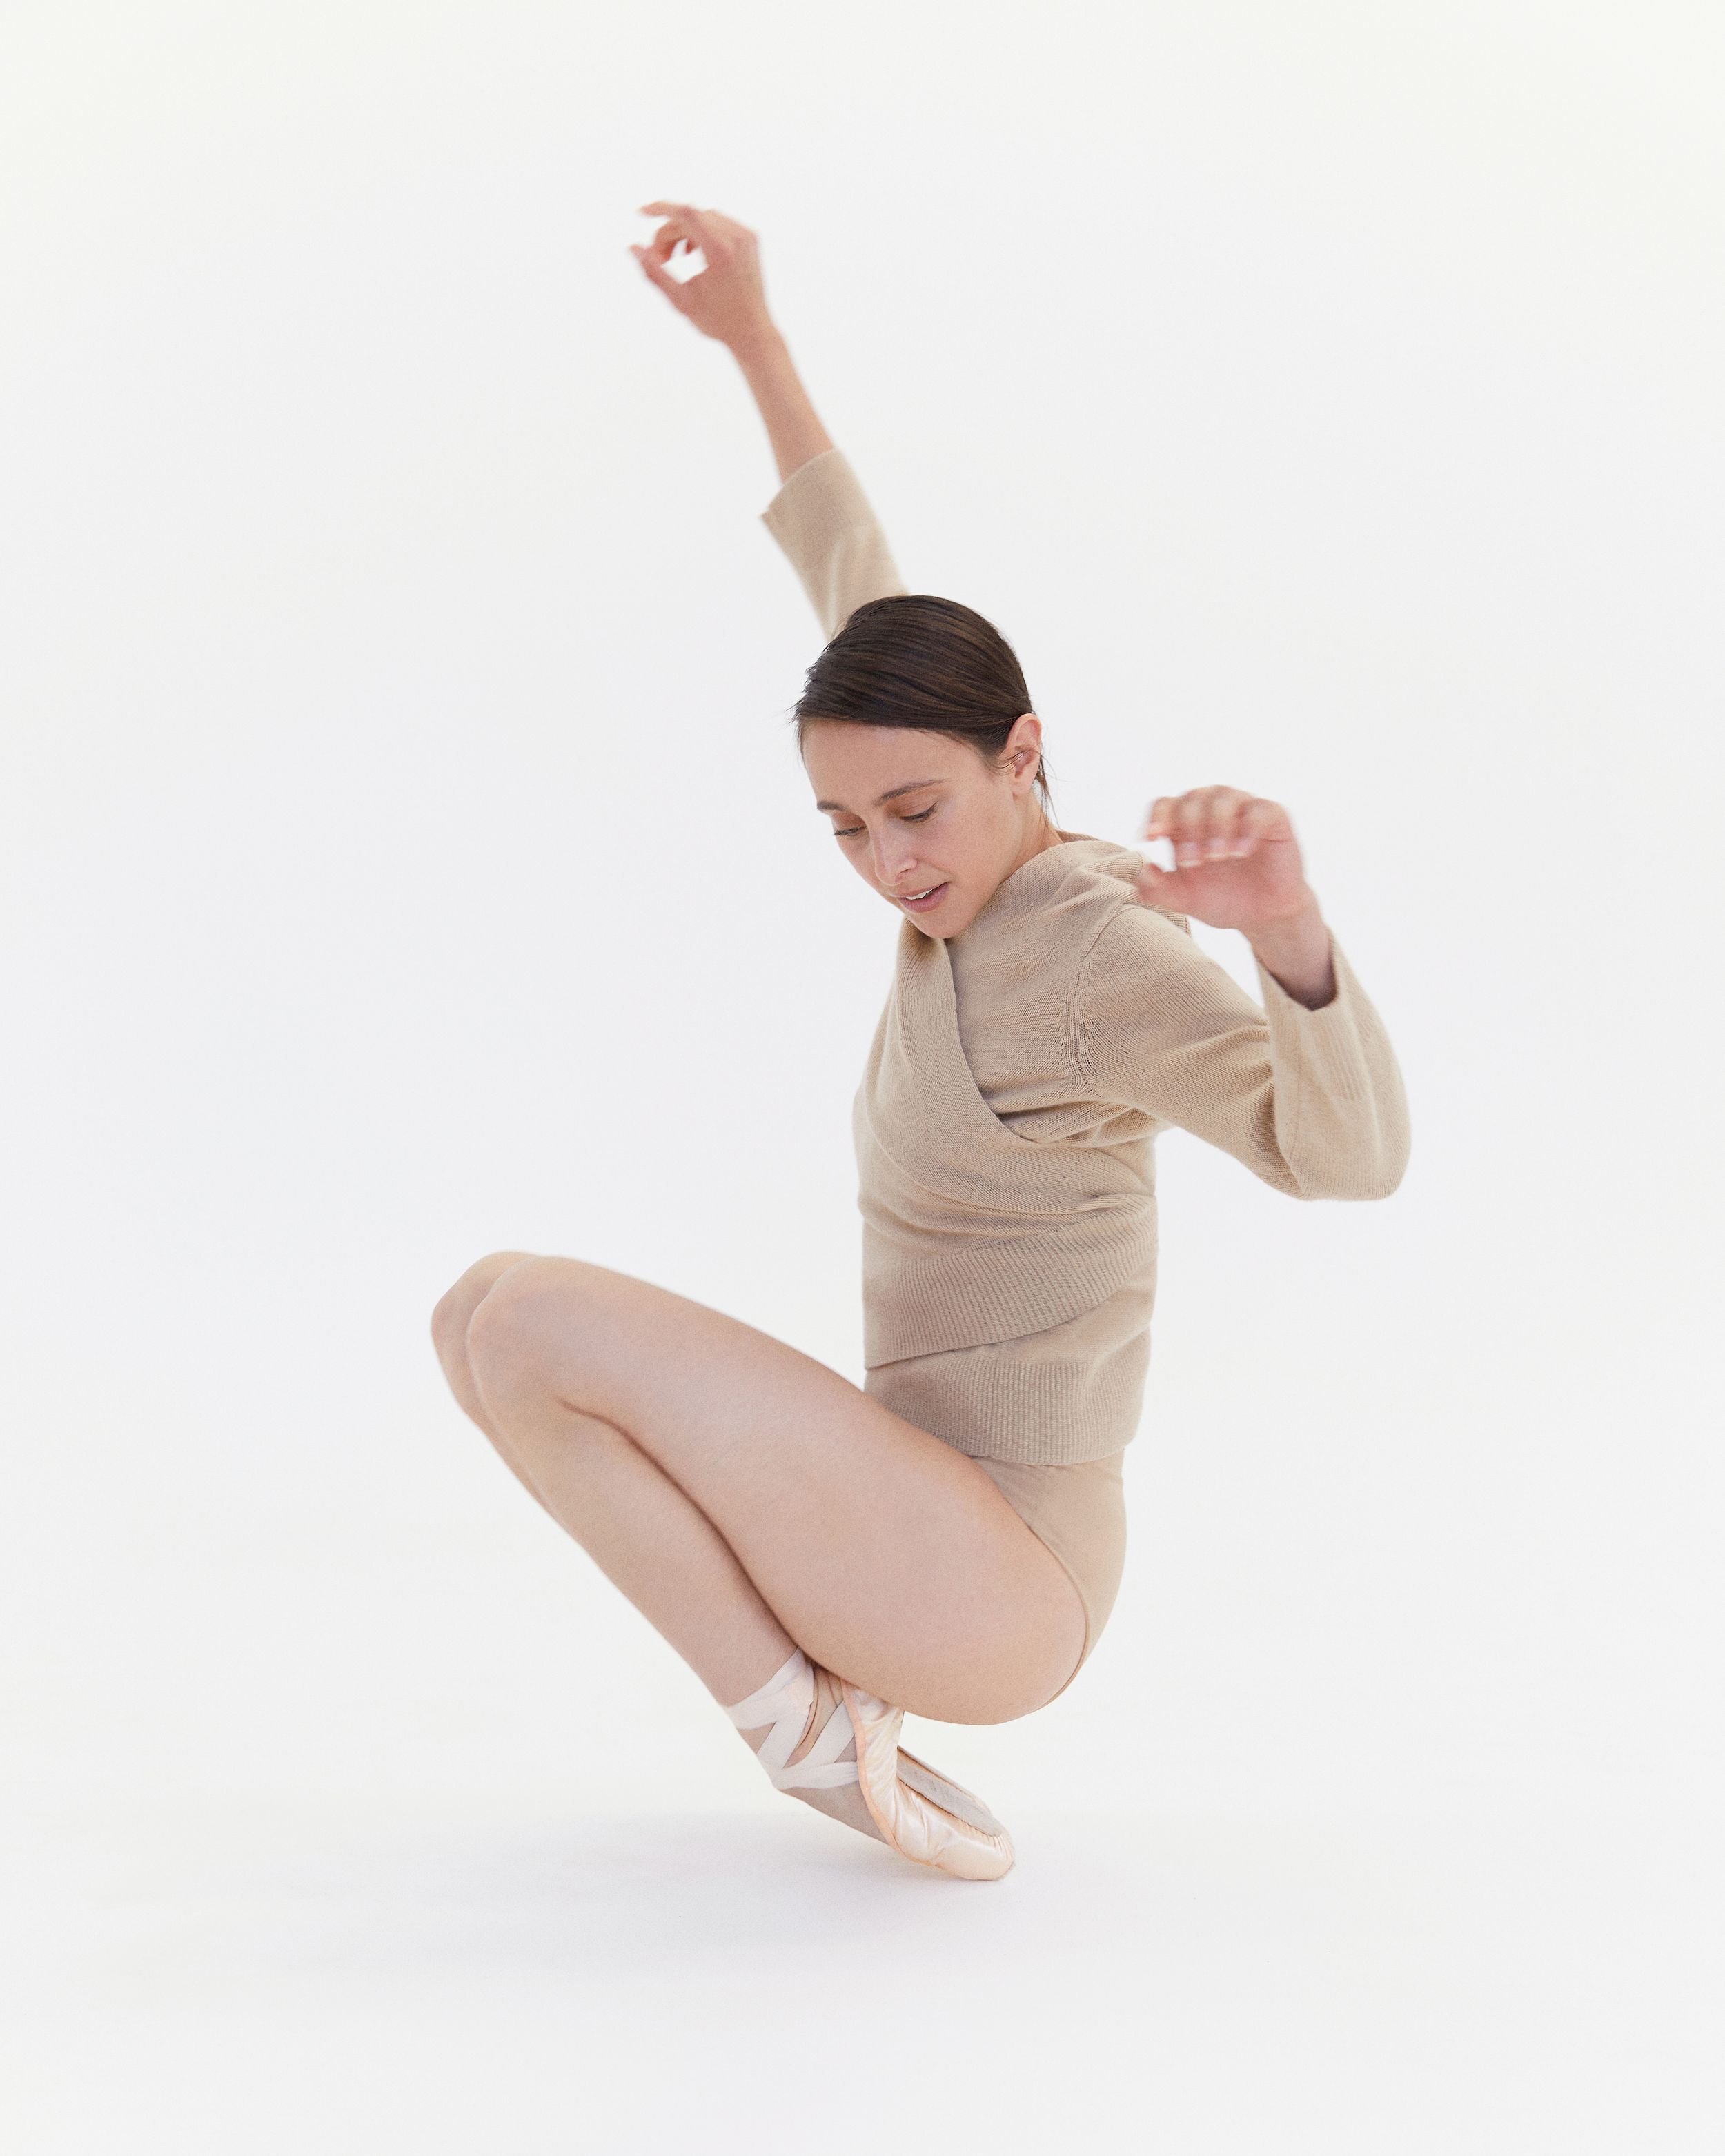 Dimity Azoury kneeling wearing a beige knit and pointe shoes